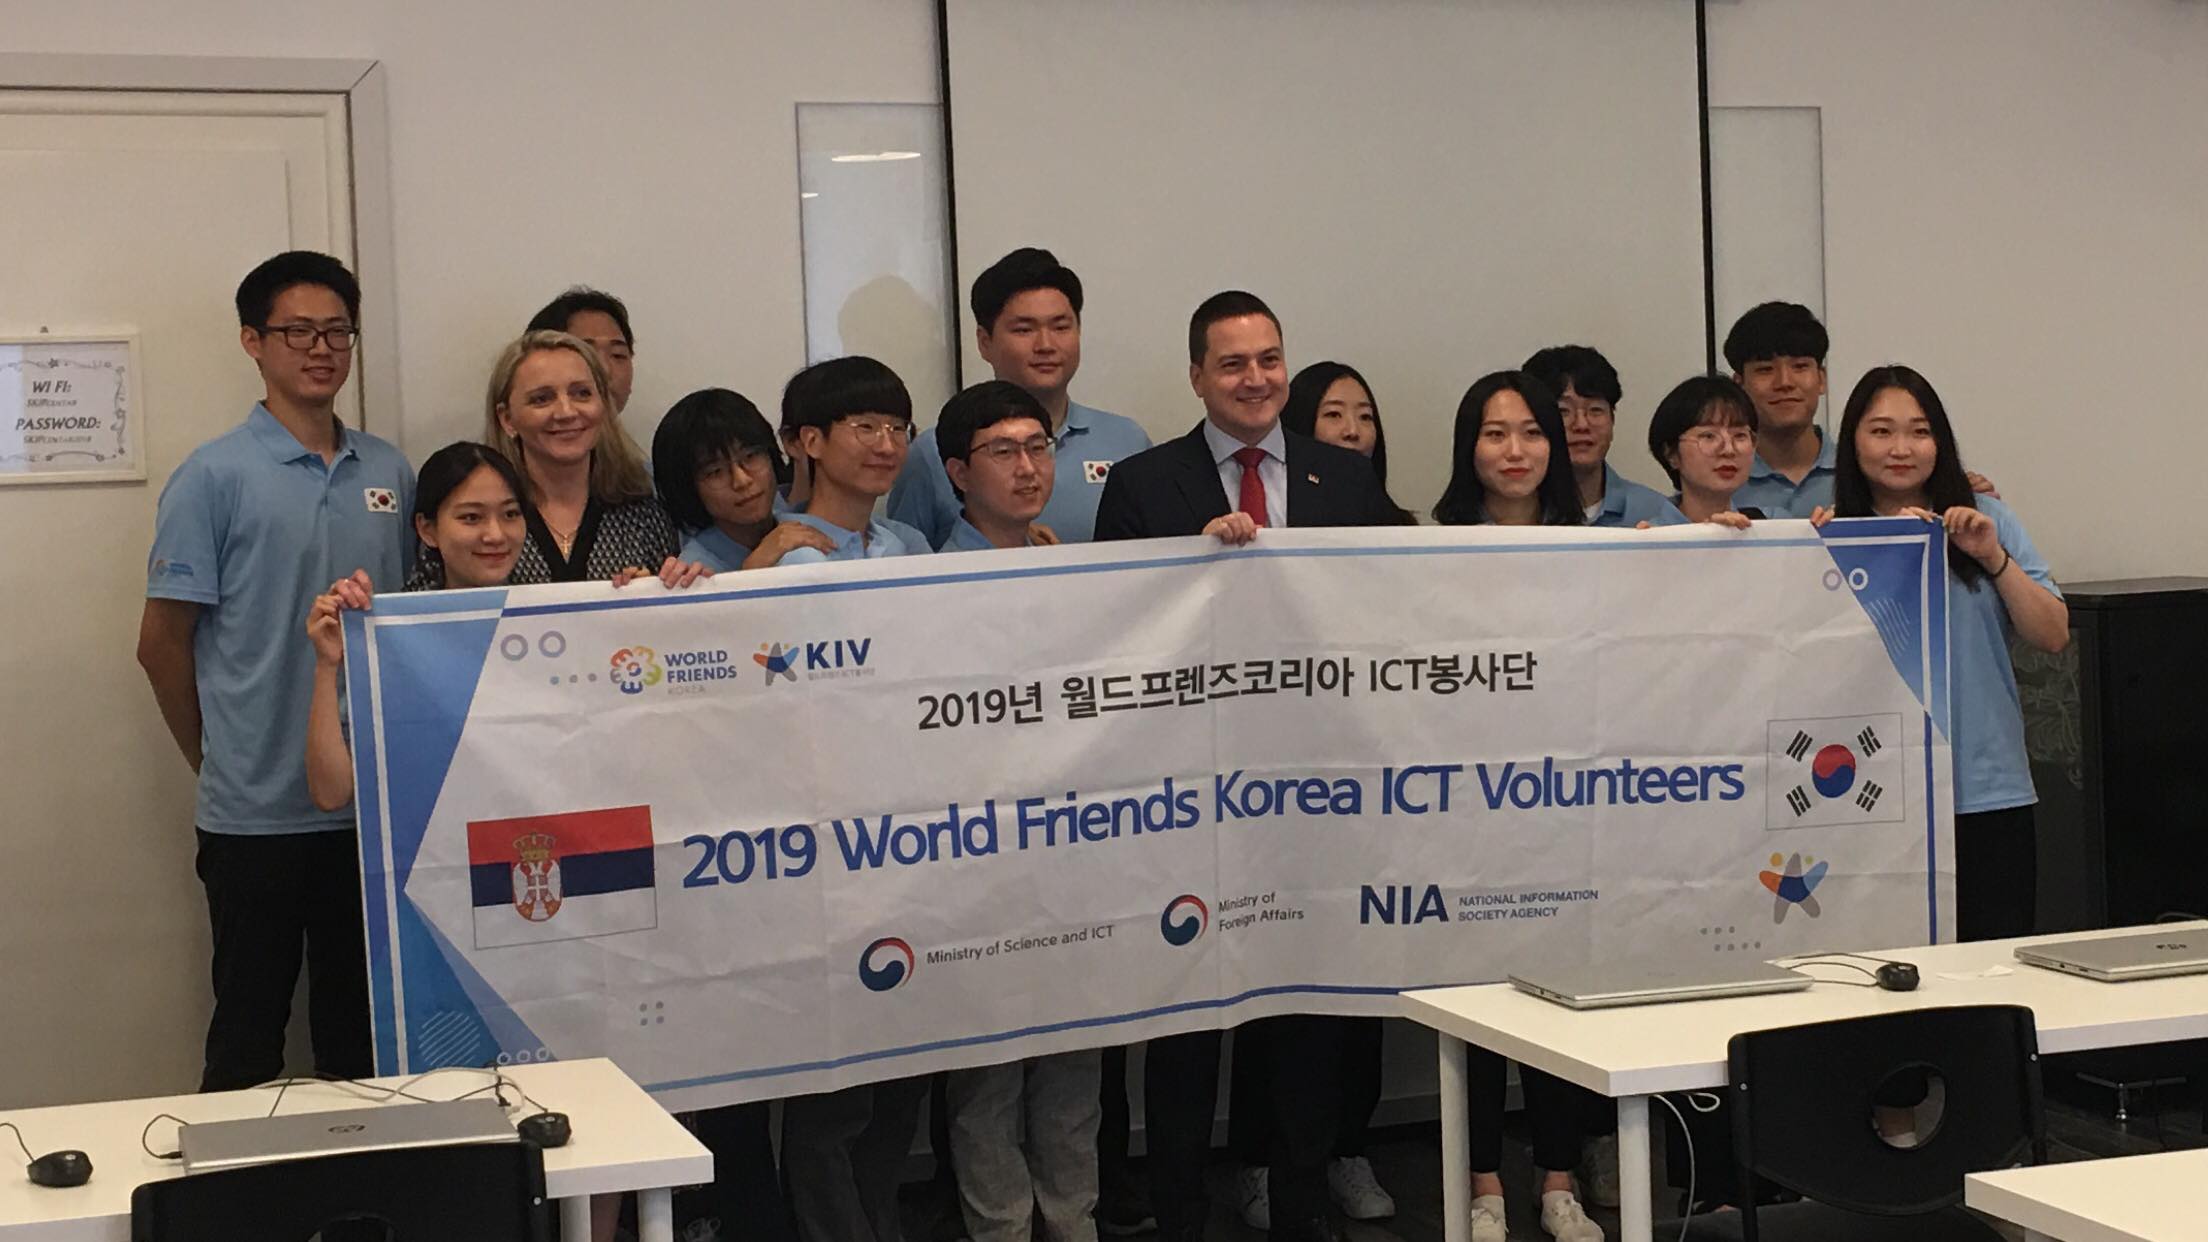 MINISTER BRANKO RUZIC VISITED SKIP CENTER AND TALKED WITH YOUNG KOREAN IT EXPERTS